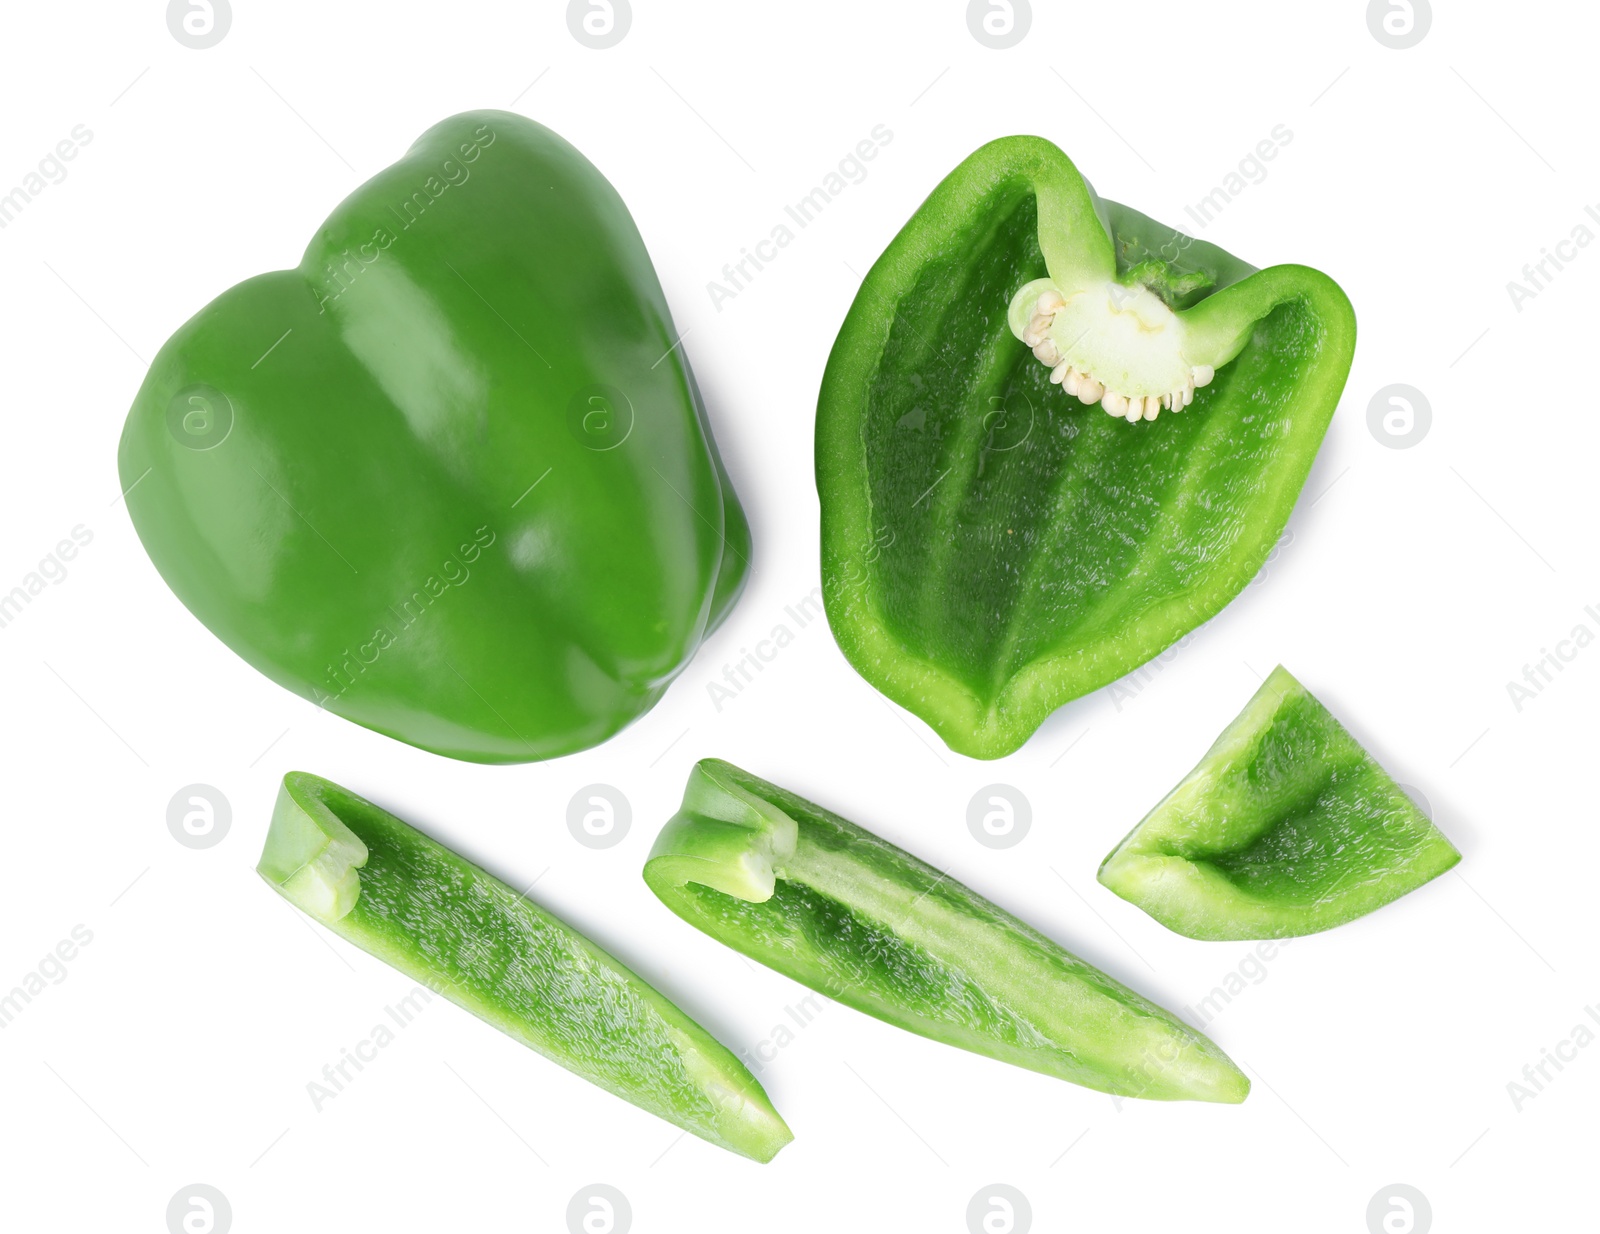 Photo of Juicy green bell peppers on white background